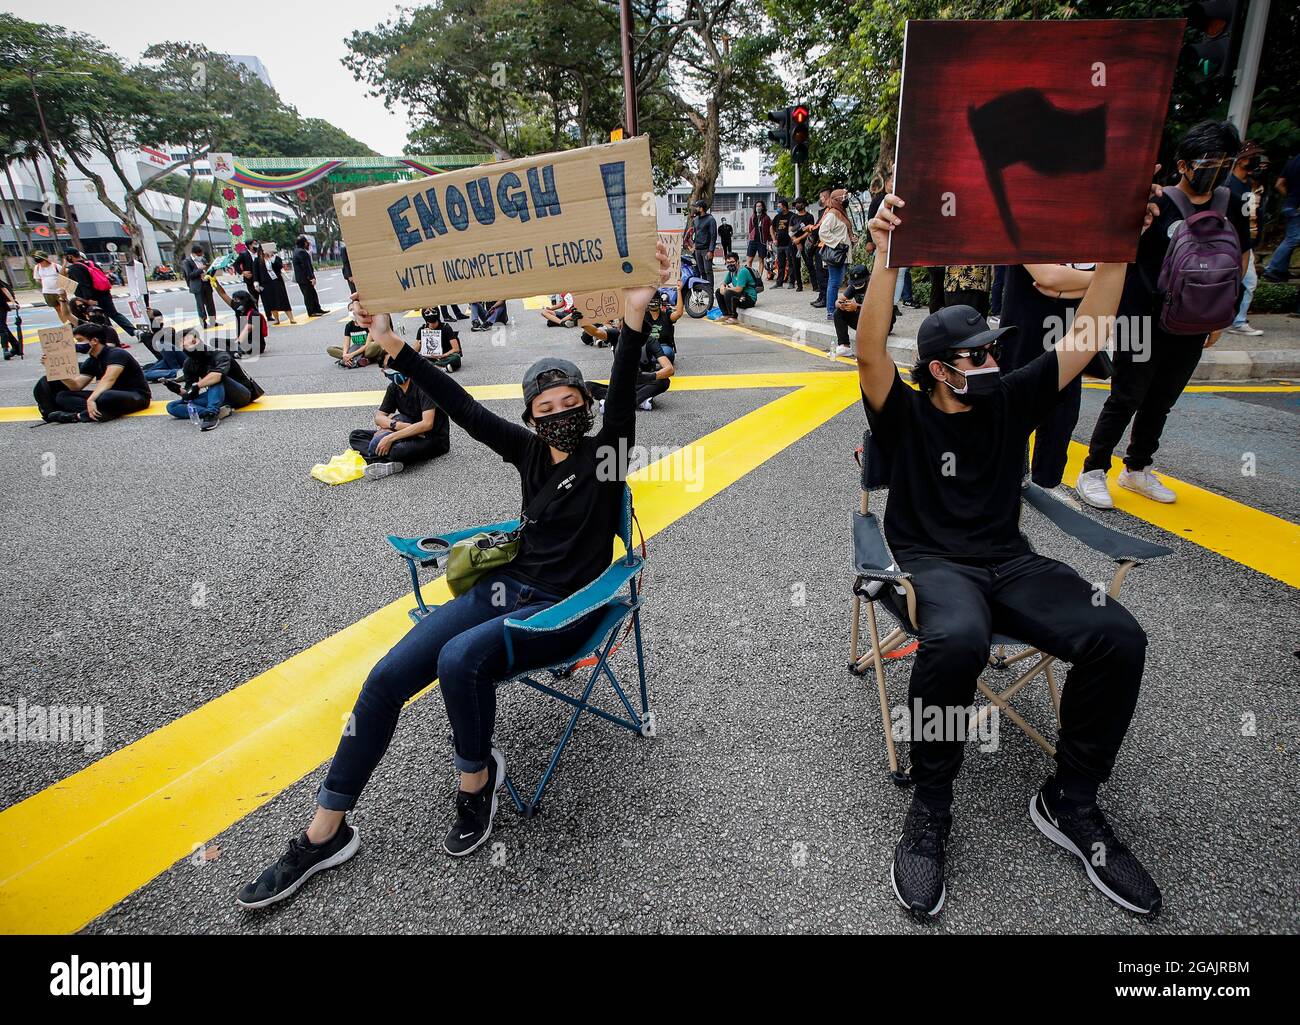 Kuala Lumpur, Malaysia. 31st July, 2021. Protesters hold placards while  sitting on chairs on the middle of the road during the  demonstration.Hundreds of black-clad Malaysians staged an anti-government  protest near the Independence